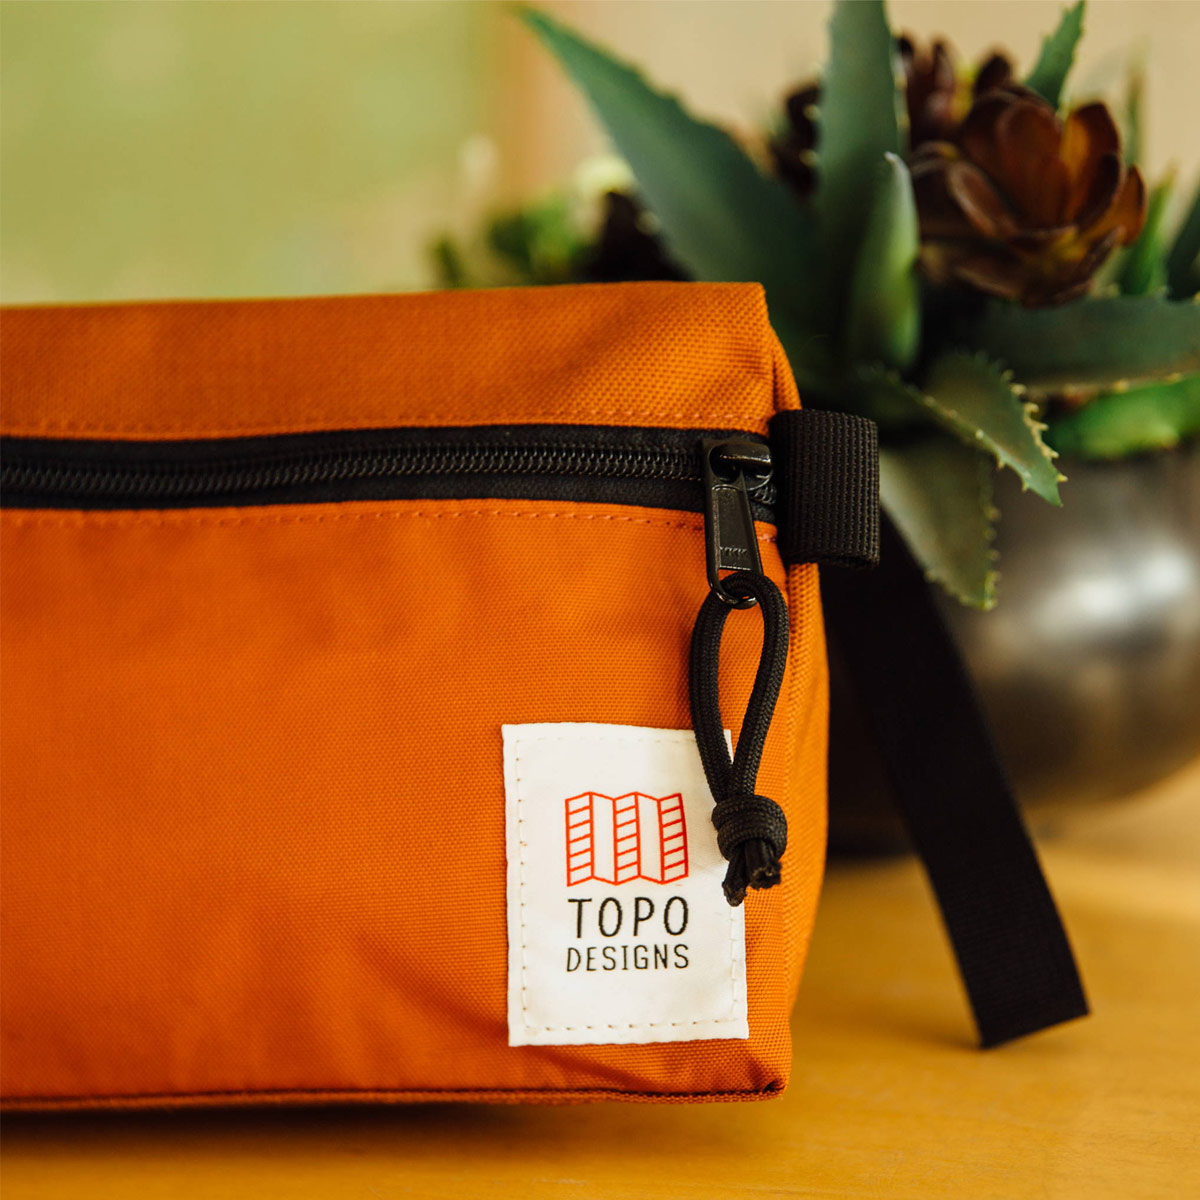 Topo Designs Dopp Kit Clay, water-resistant, travel light, accessory bag